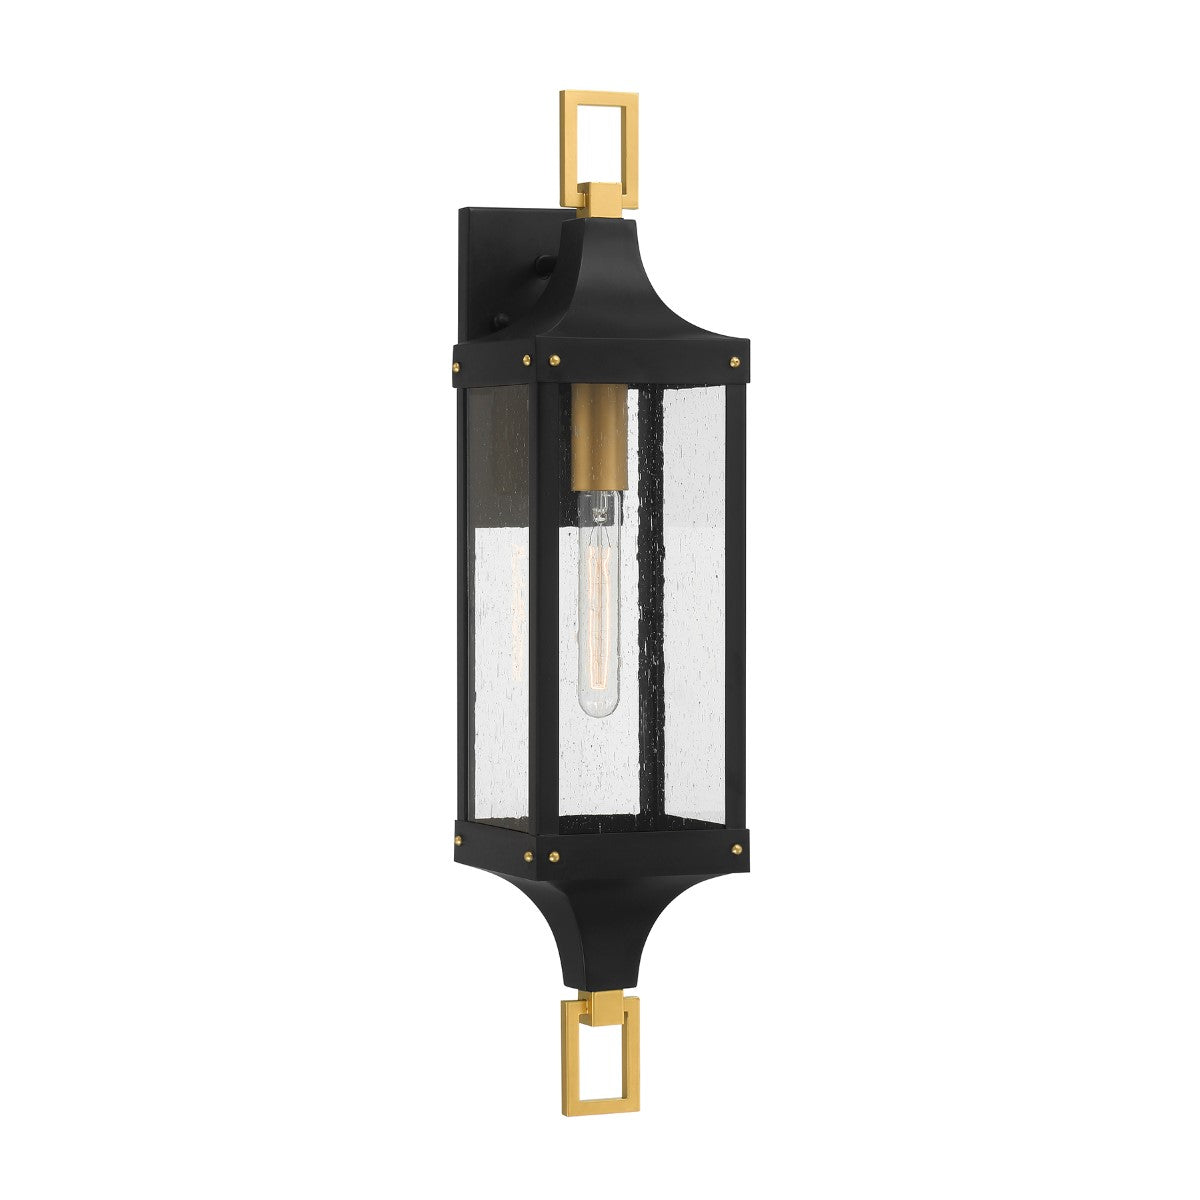 Glendale 28 in. Outdoor Wall Lantern Matte Black and Weathered Brushed Brass Finish - Bees Lighting